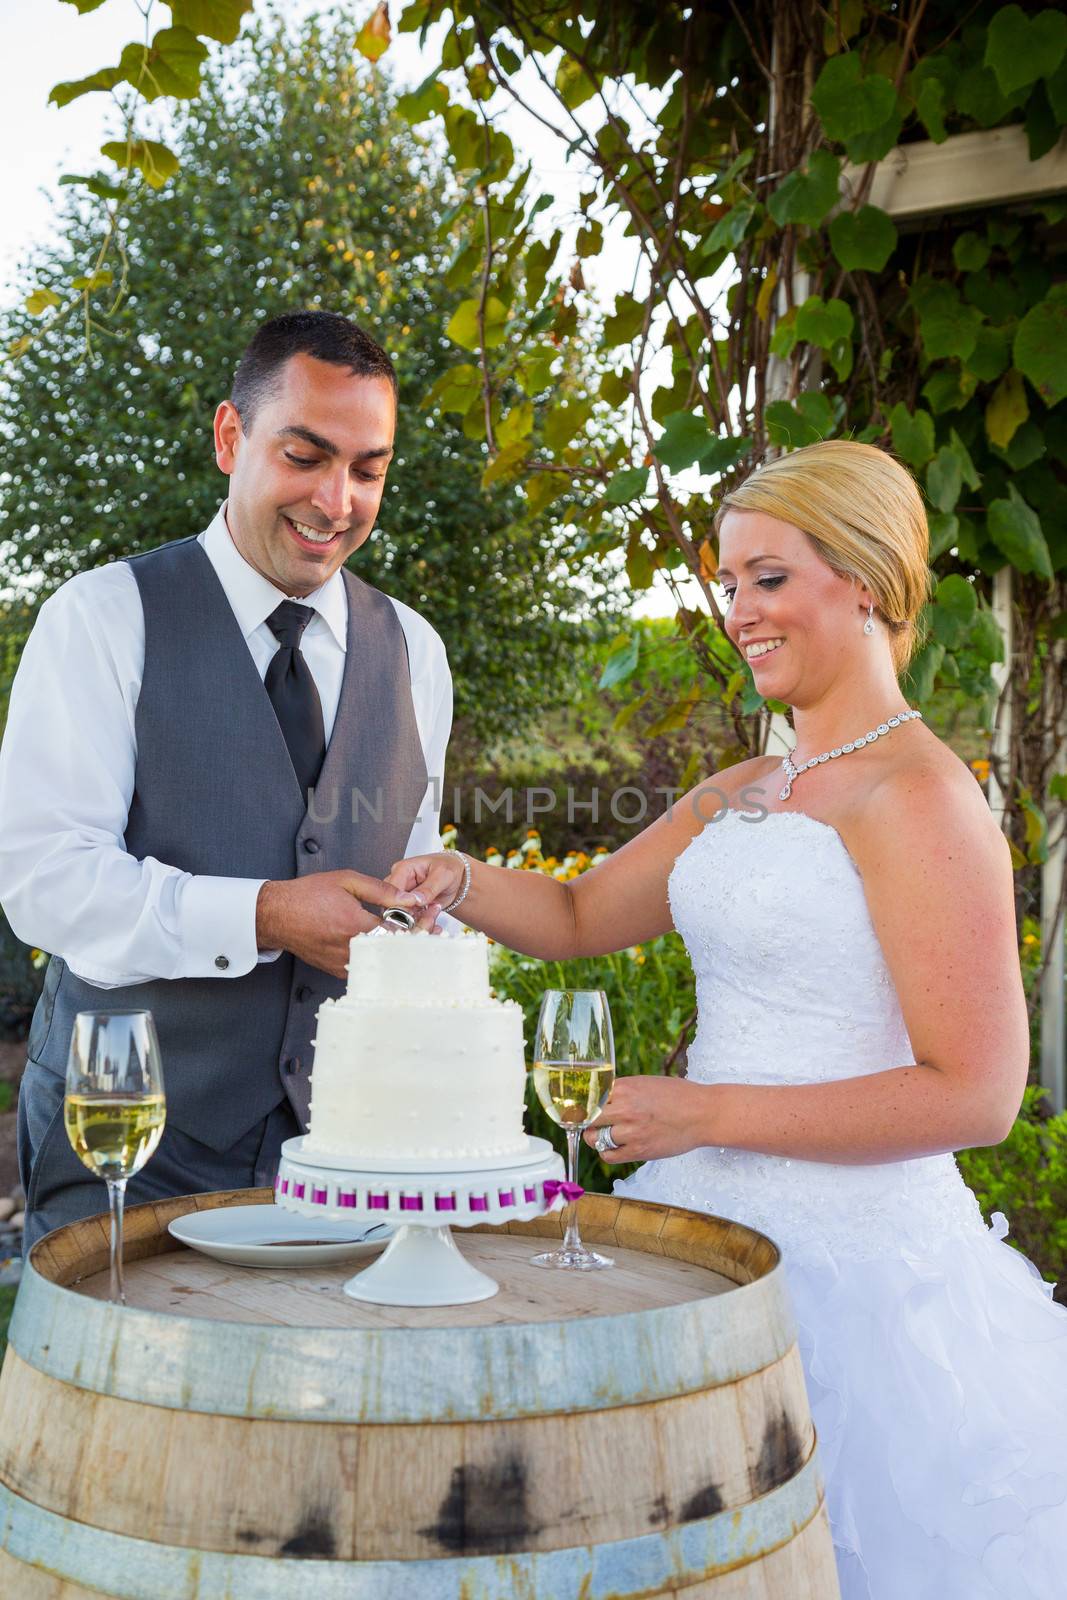 Bride and Groom Cake Cutting by joshuaraineyphotography